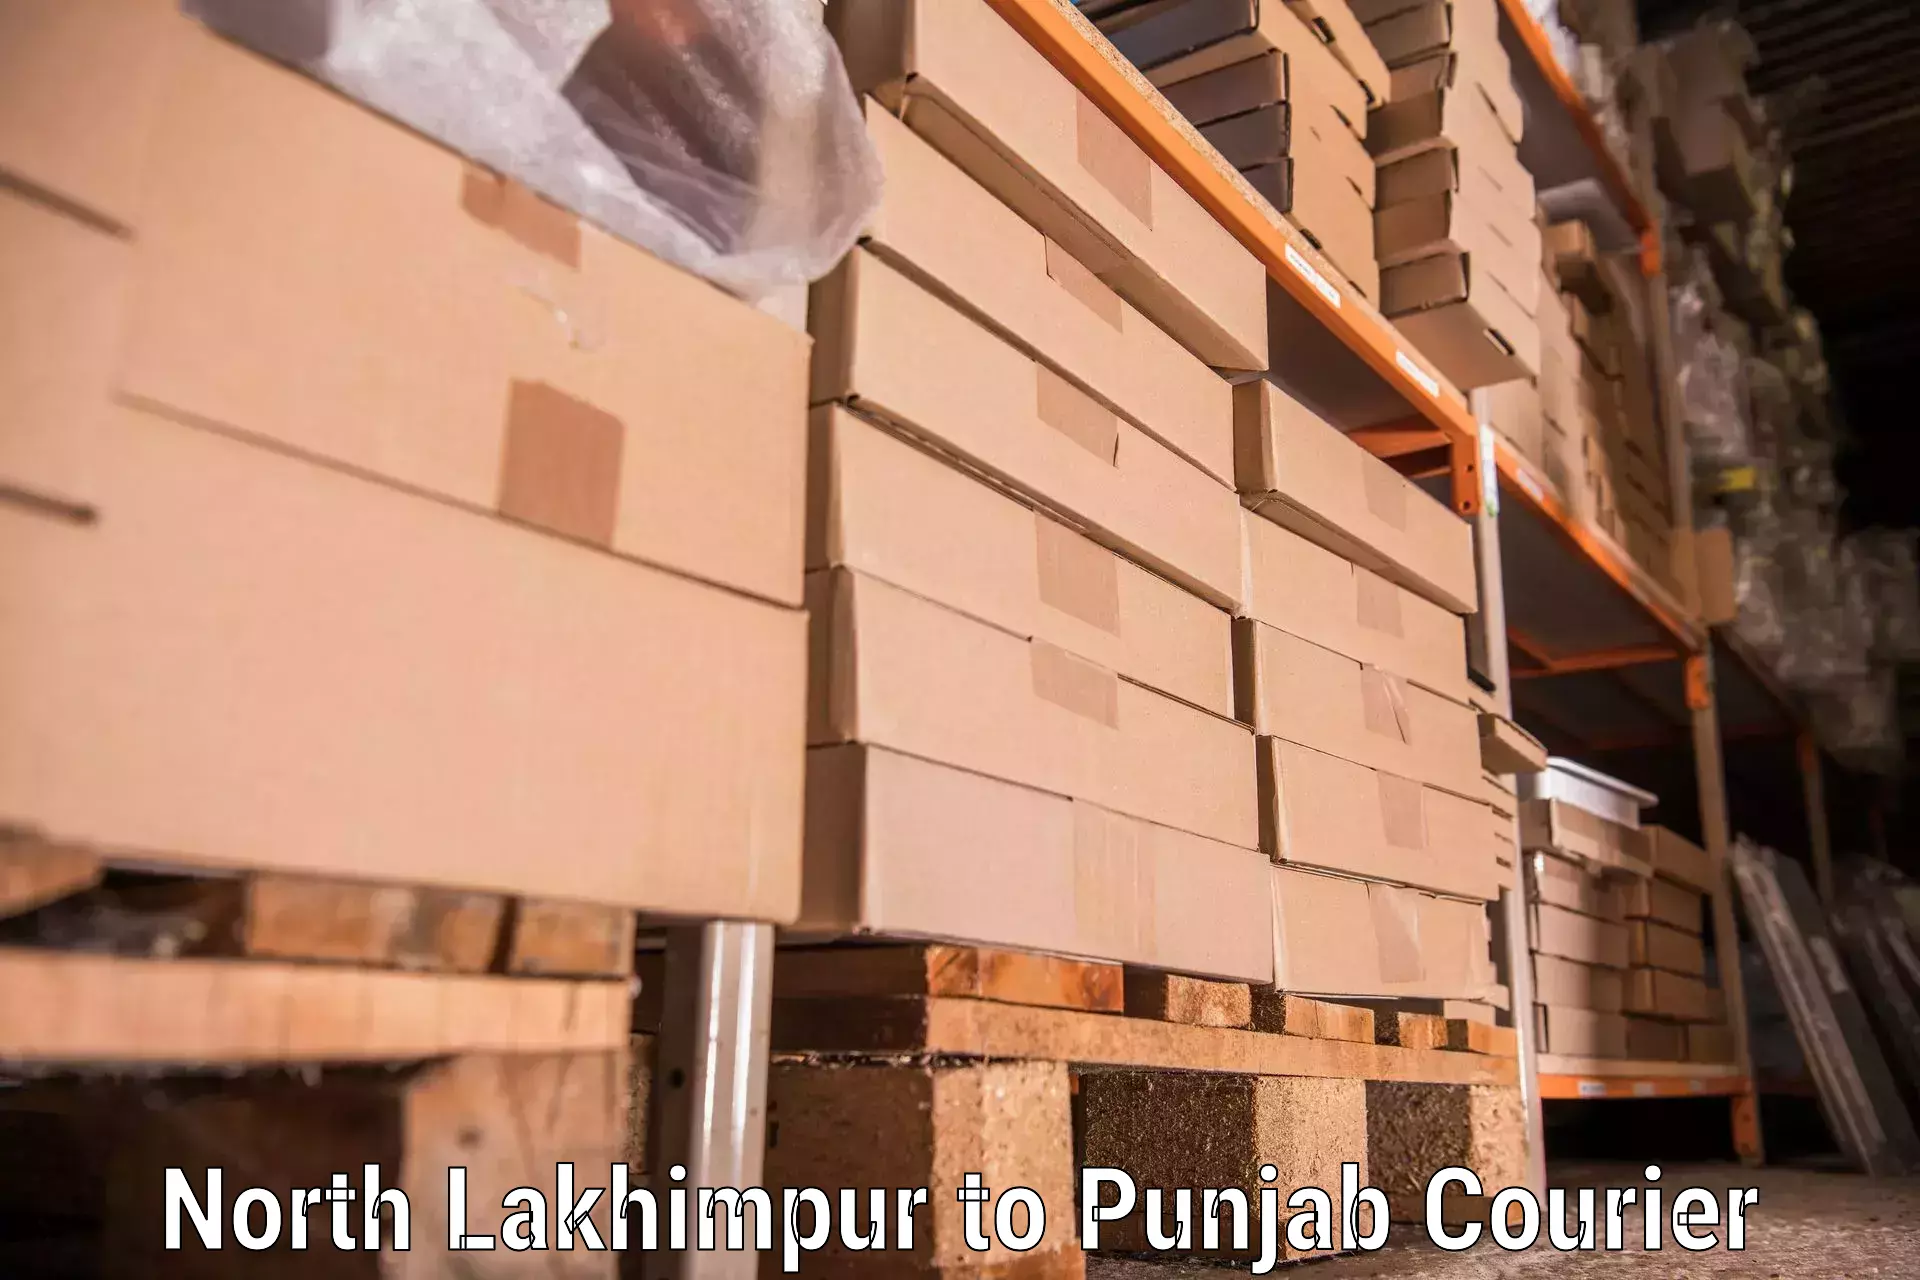 Furniture moving specialists North Lakhimpur to Dhuri